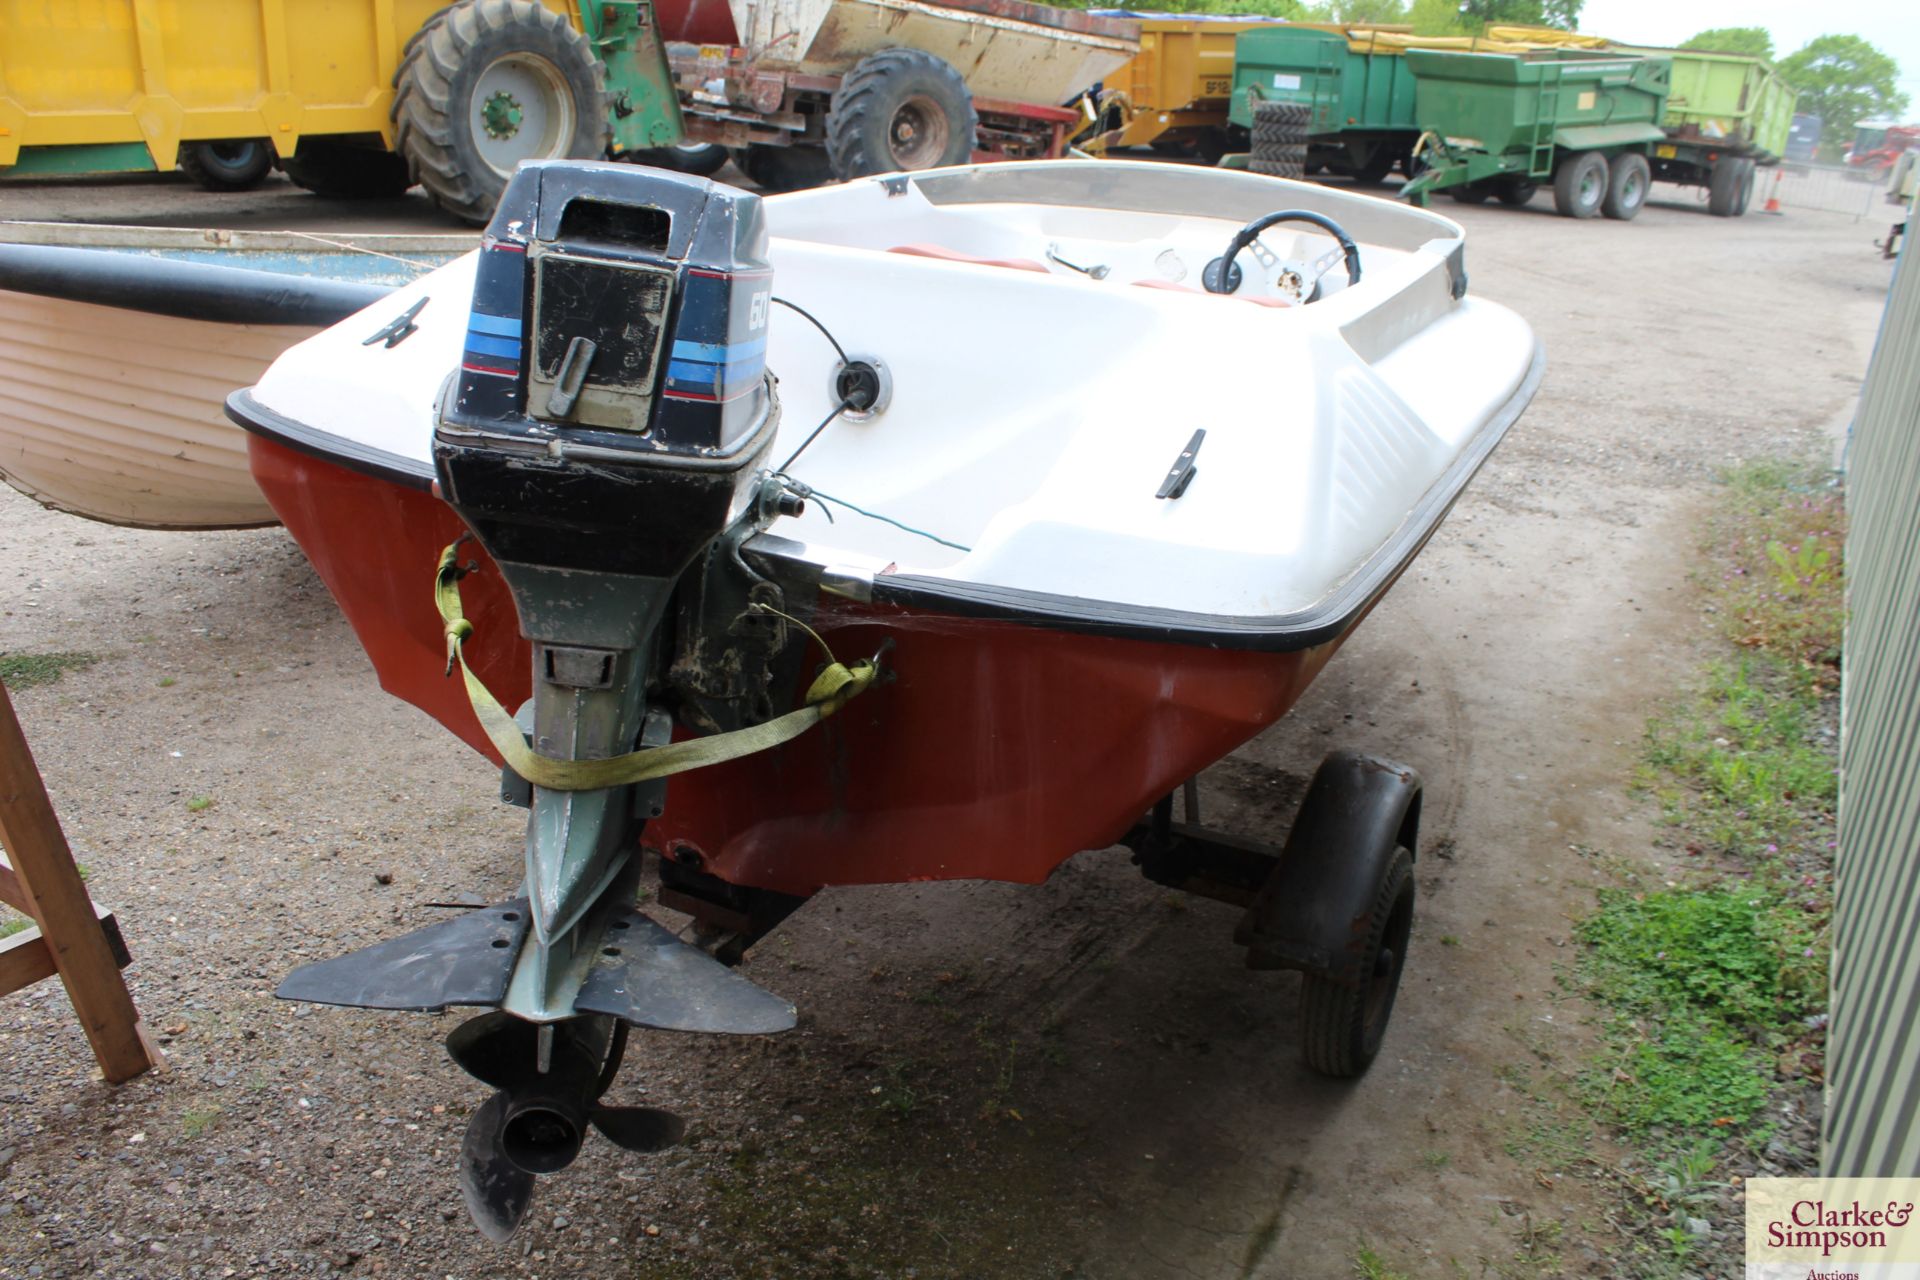 13ft speedboat. With Evinrude 60HP outboard (runs and pumps water), trailer, water skis, knee board, - Image 3 of 17